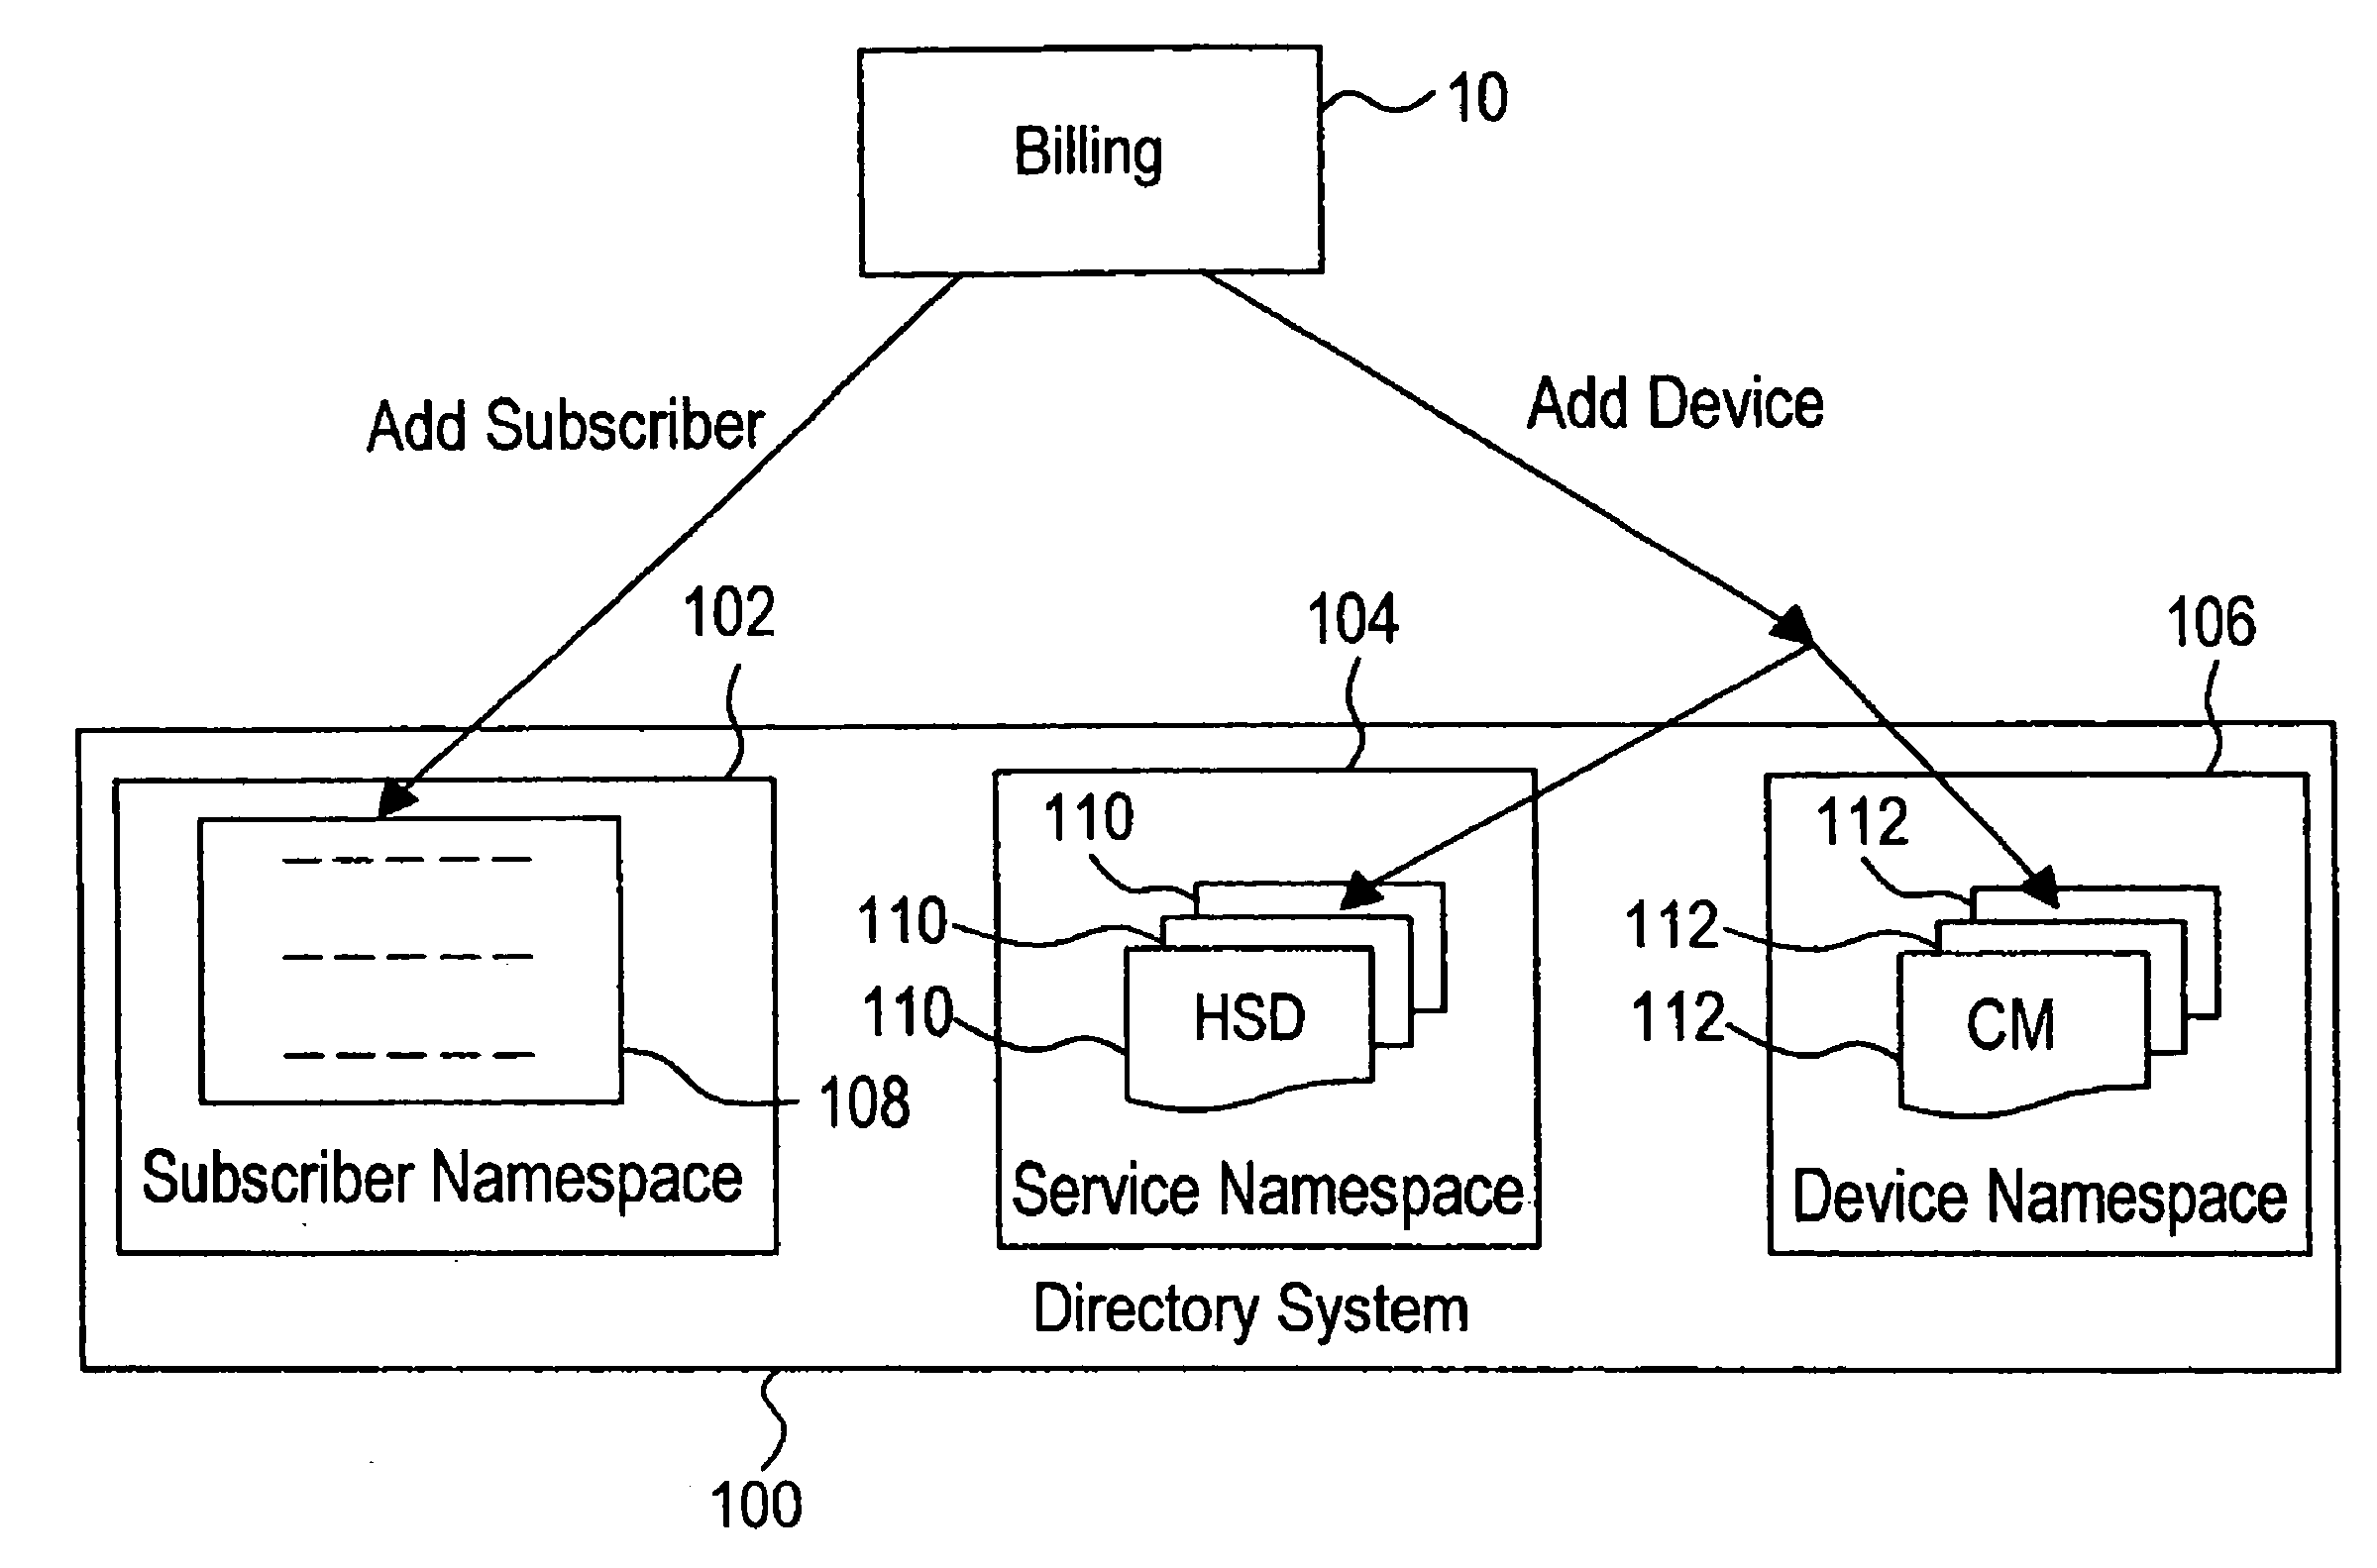 Method for provisioning subscribers, products, and services in a broadband network